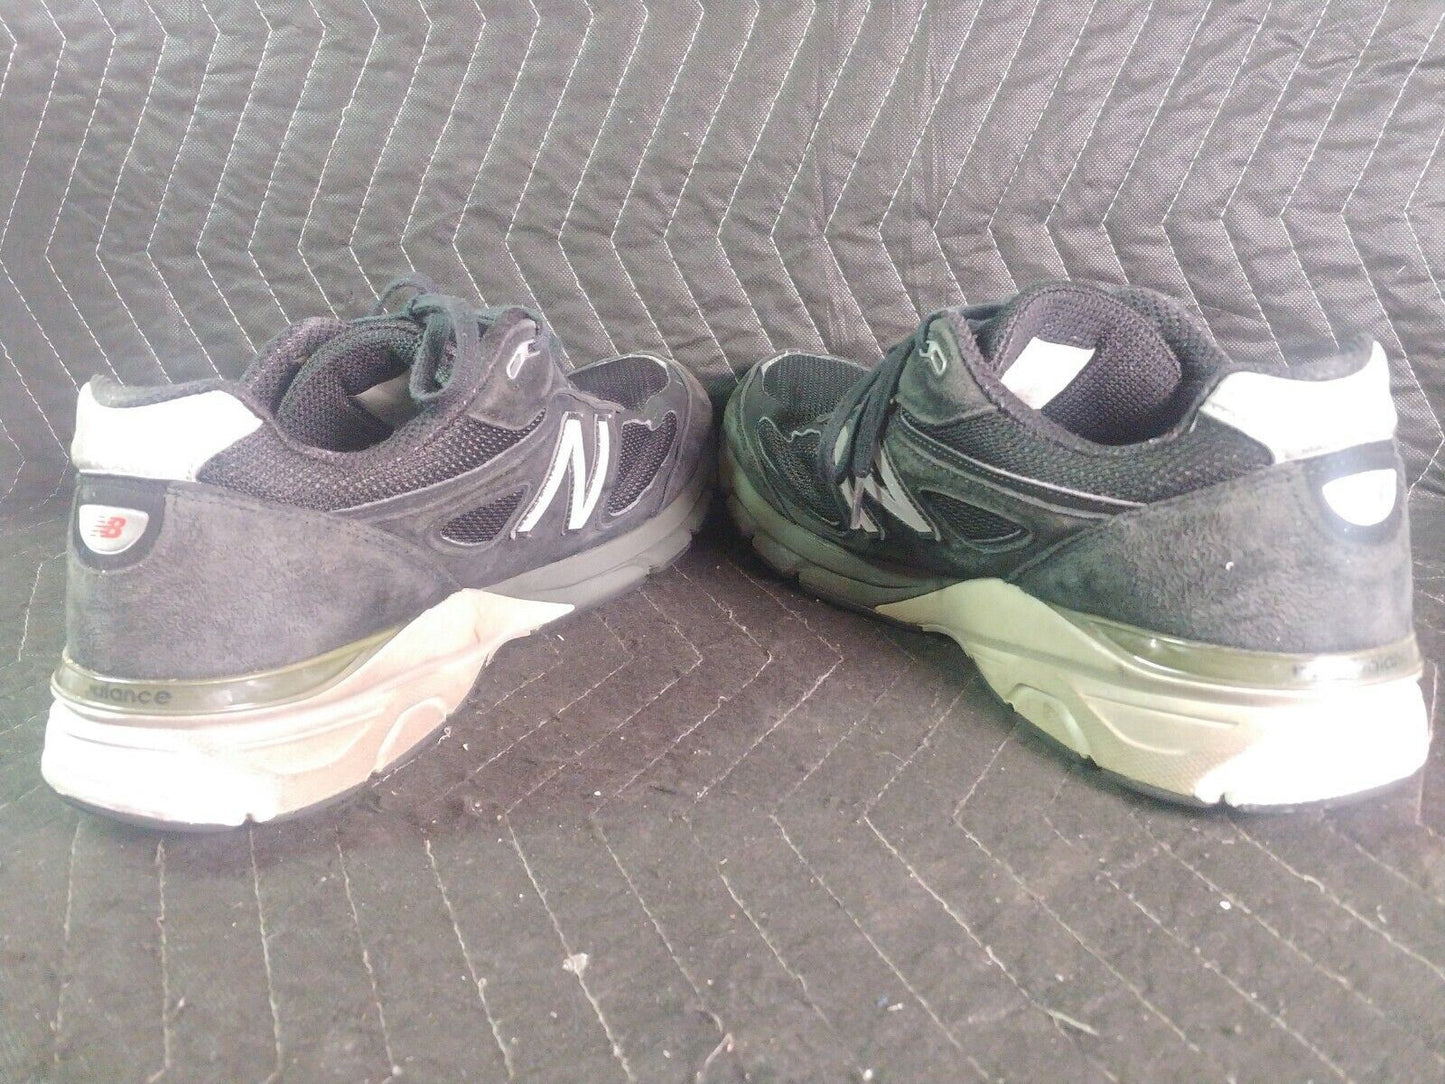 New Balance 990v4 Mens Black Running Walking Shoes Sneakers Made In USA SIZE 14